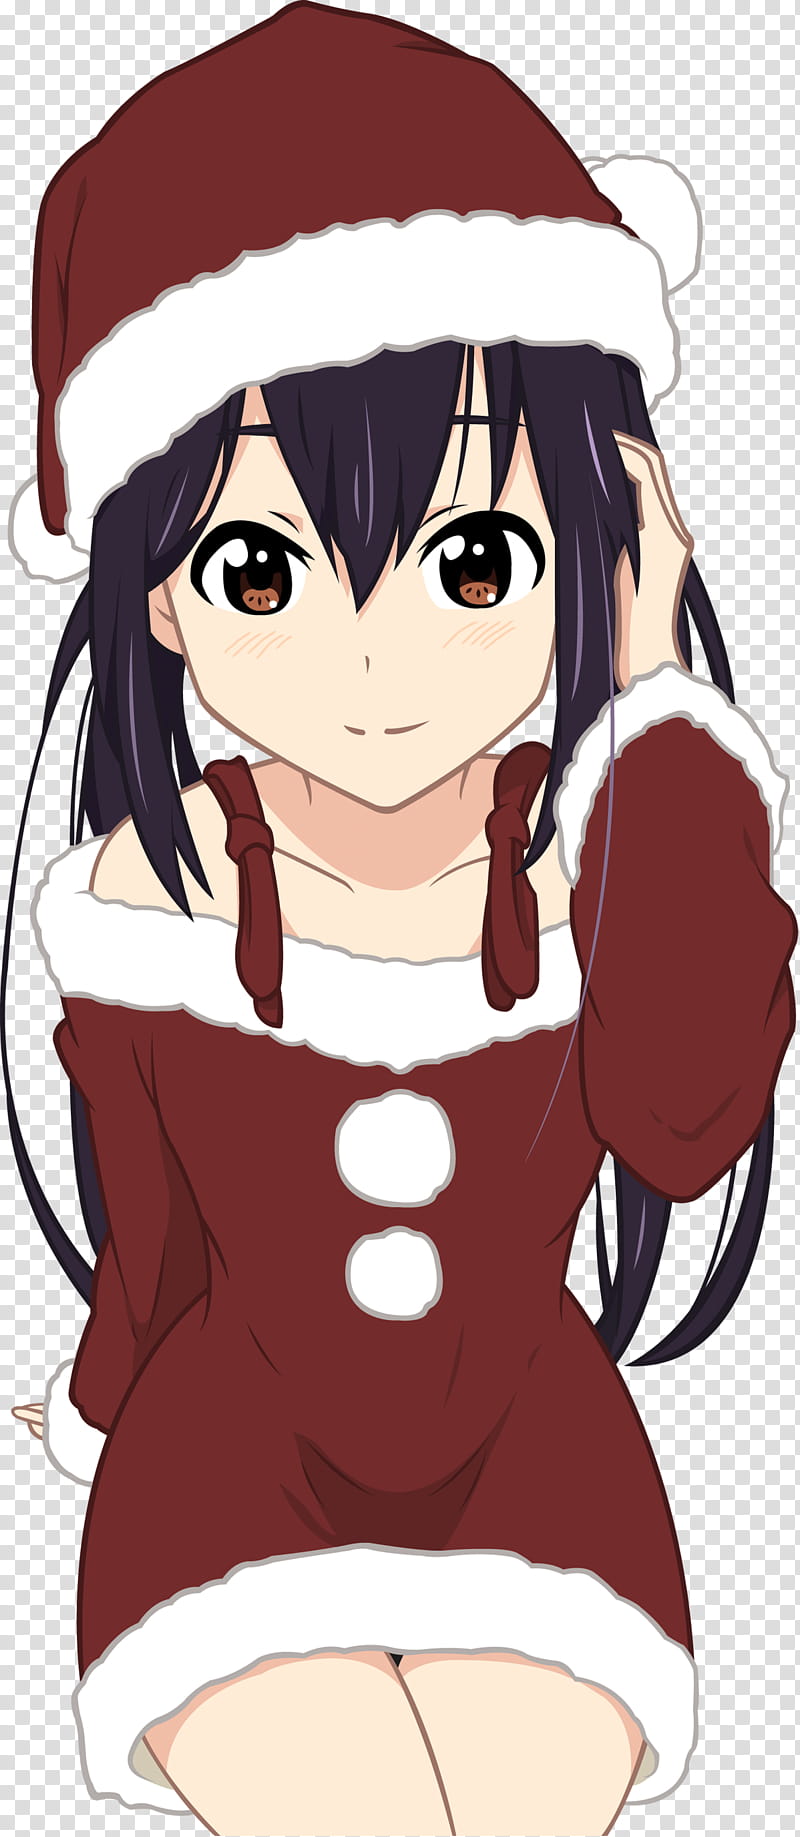 Xmas Azusa , black-haired woman wearing Christmas hat anime character transparent background PNG clipart